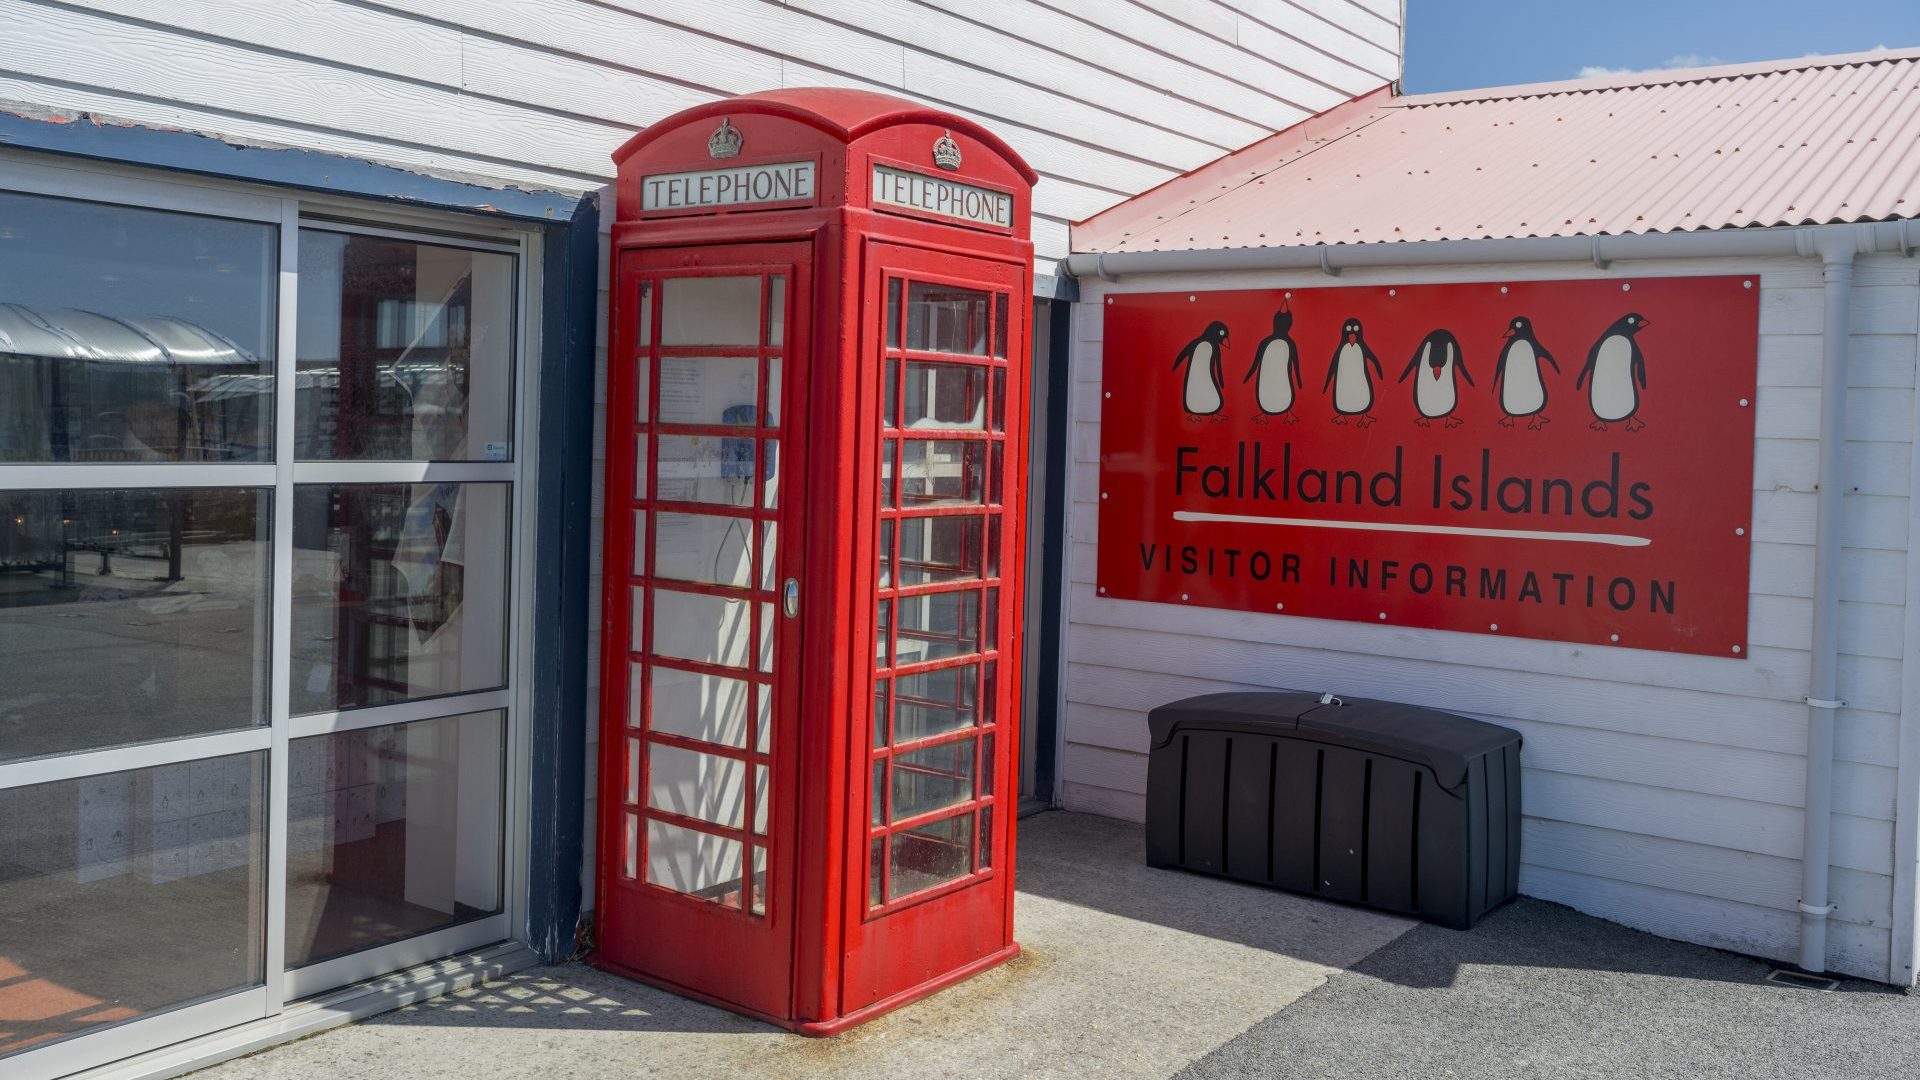 A United Kingdom phone box in front of a house on Ross Road in Port Stanley, Falkland Islands. Photo: Wolfgang Kaehler/LightRocket via Getty Images